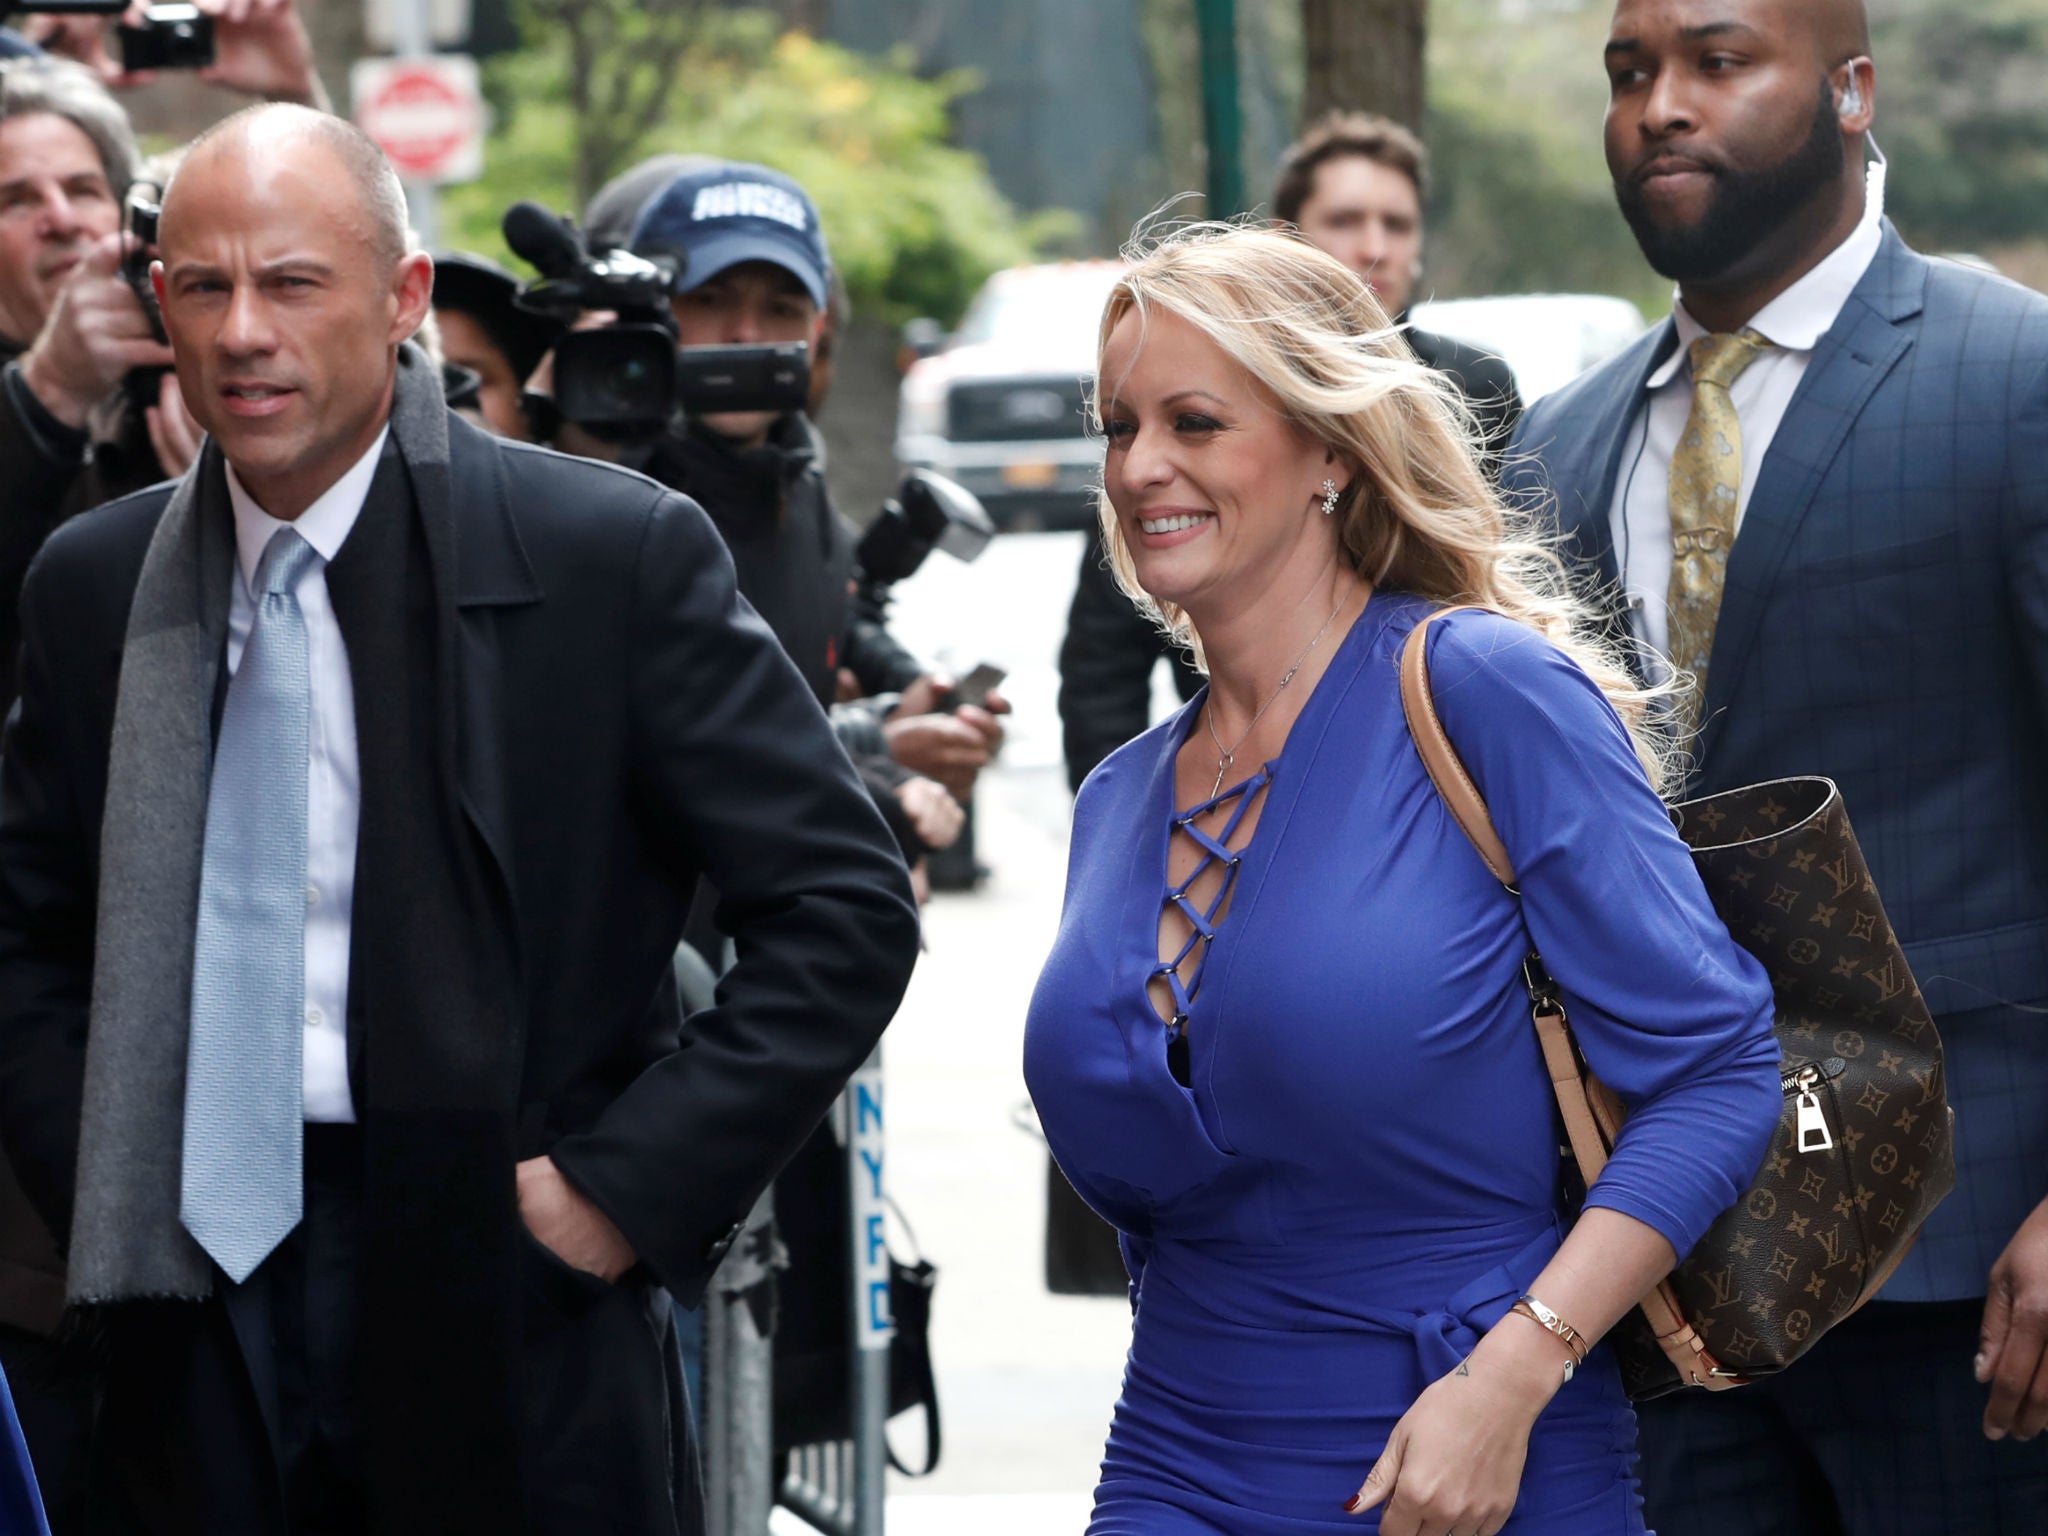 Trump Accuser Stormy Daniels Sues Michael Cohen For ‘colluding’ With Her Ex Lawyer The